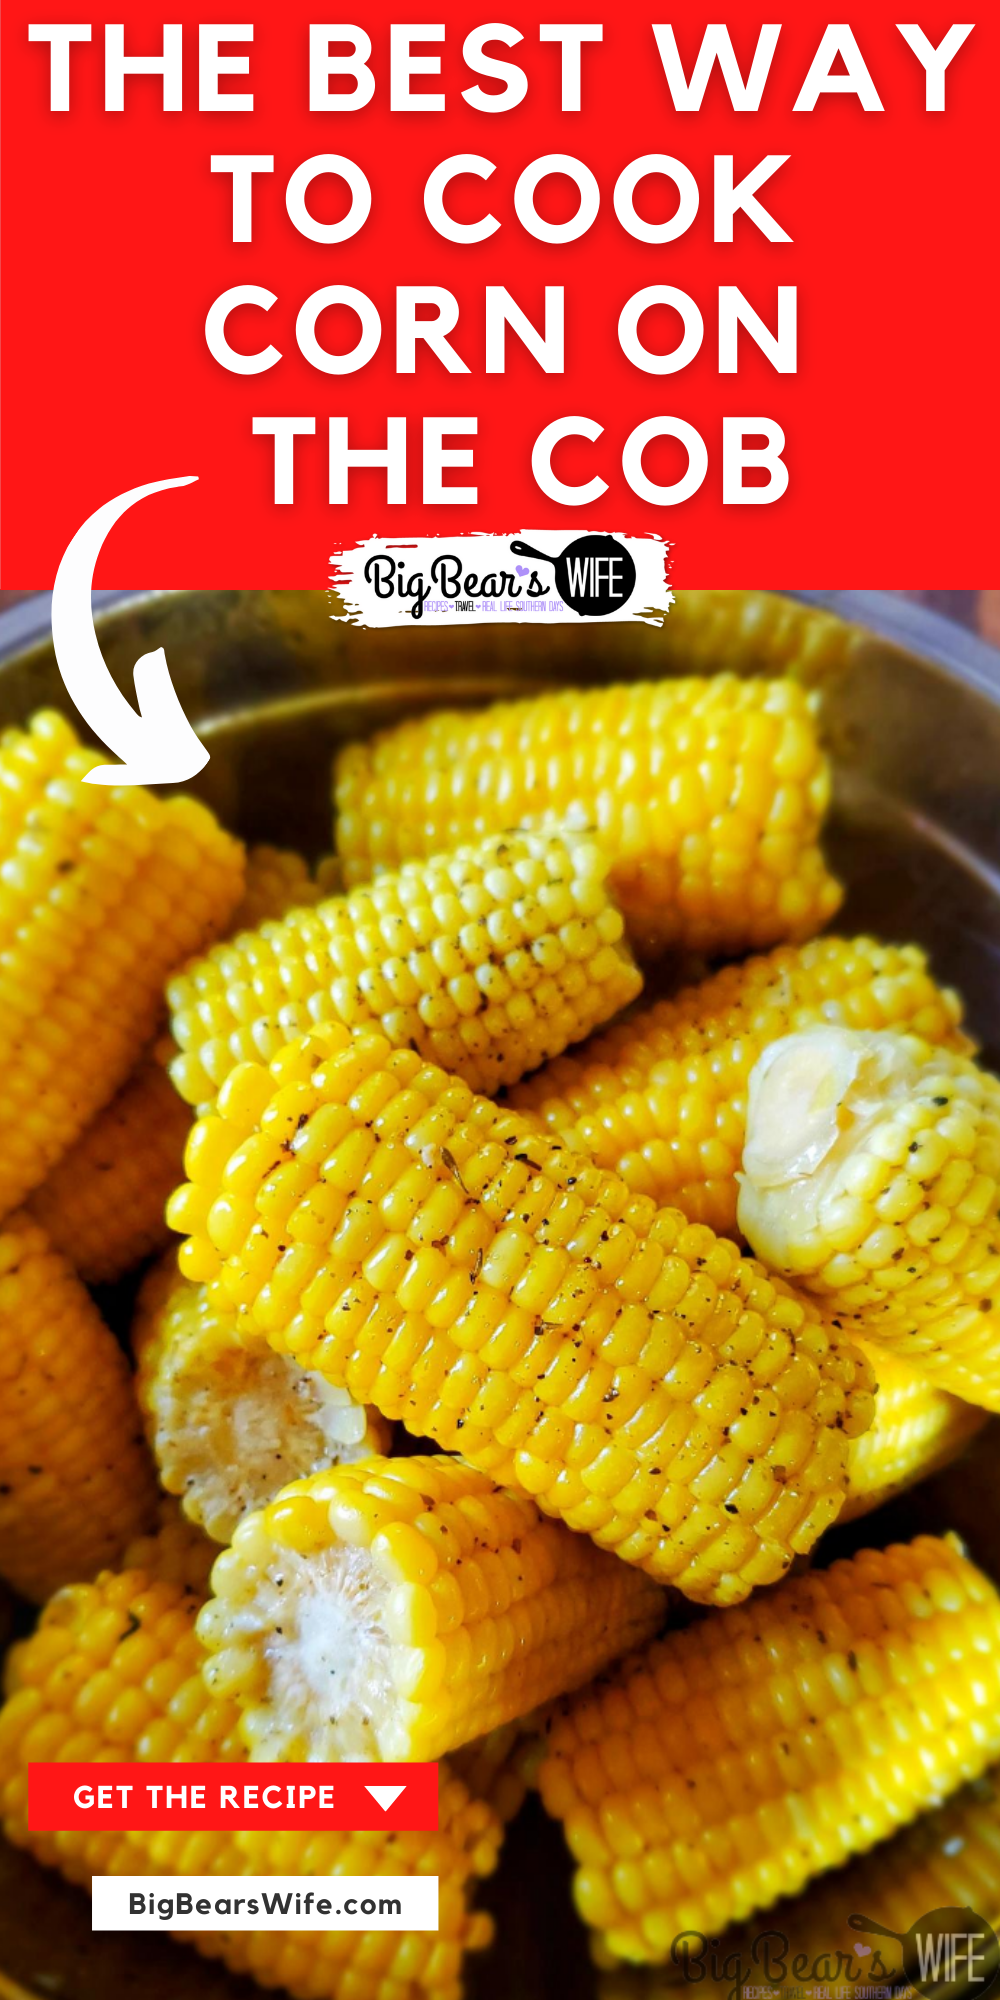 Making Milk Butter Corn on the Cob by boiling corn on the cob in a mix of milk and butter makes some of the most delicious corn on the cob. Boiling corn on the cob in Milk and Butter is the best way to cook corn on the cob! via @bigbearswife